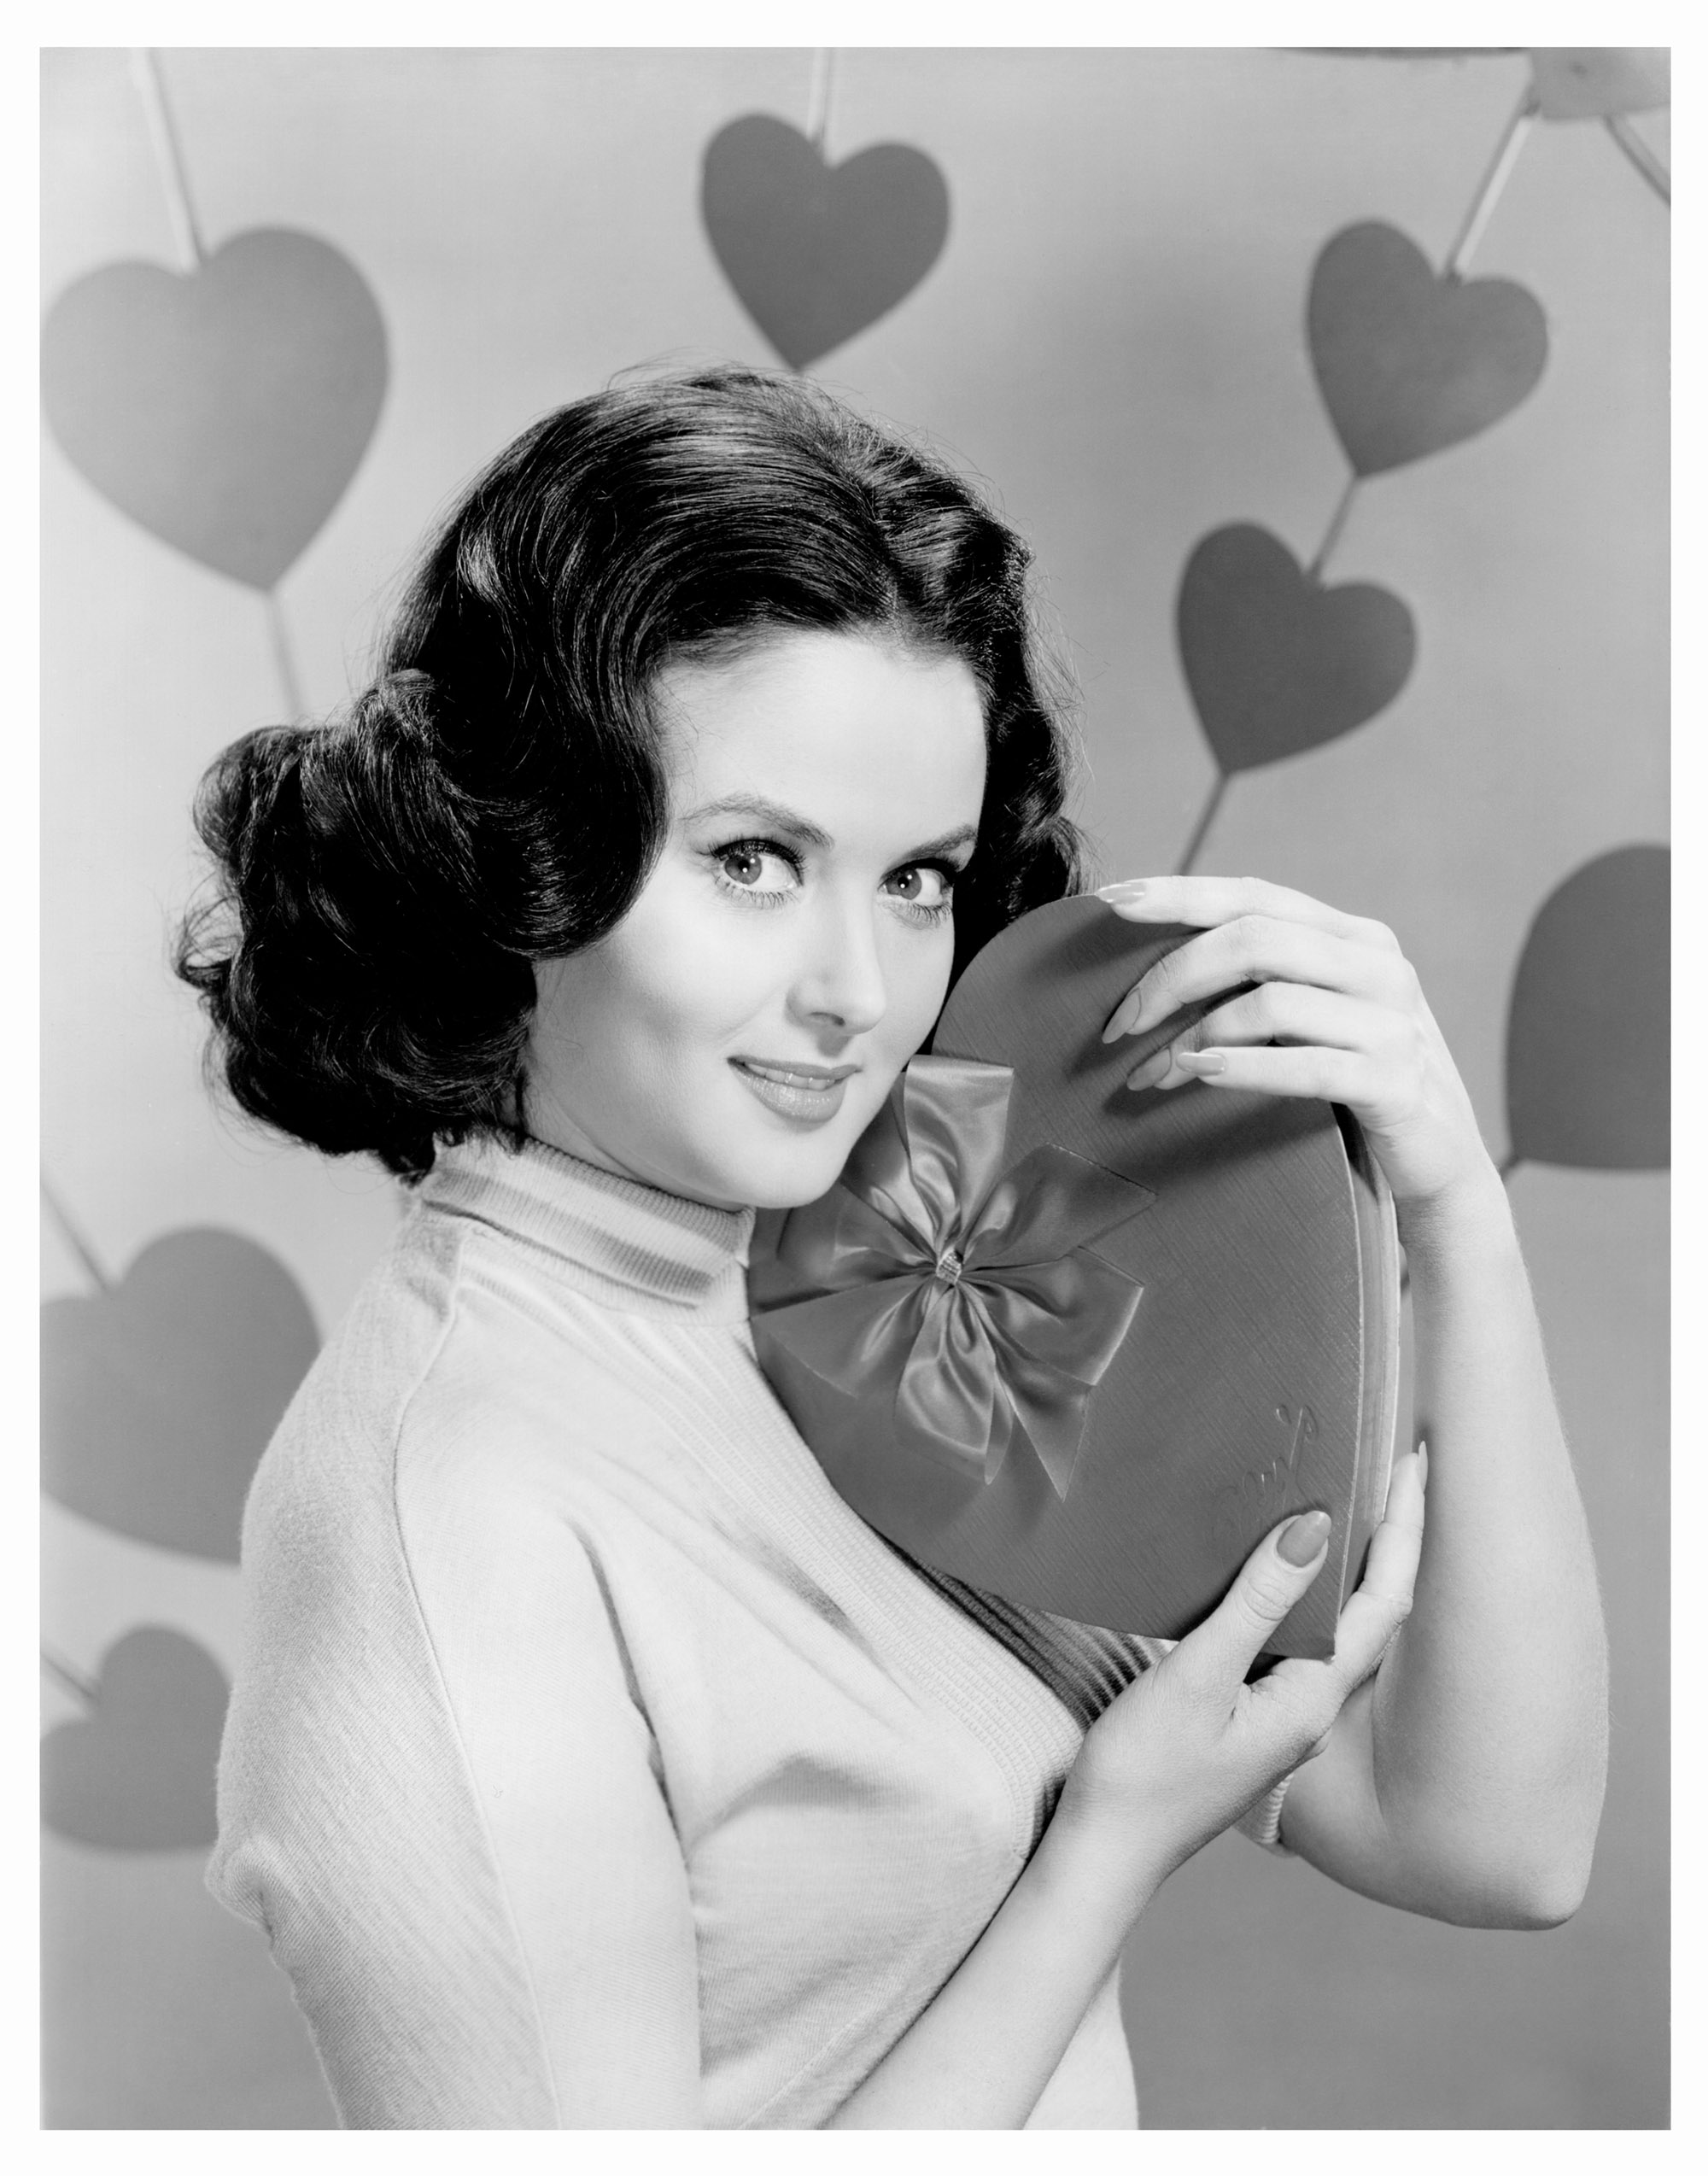 Actress and model Nancy Walters holds a heart-shaped box of chocolate on Valentine’s Day in a publicity shot from the the early 1960s.